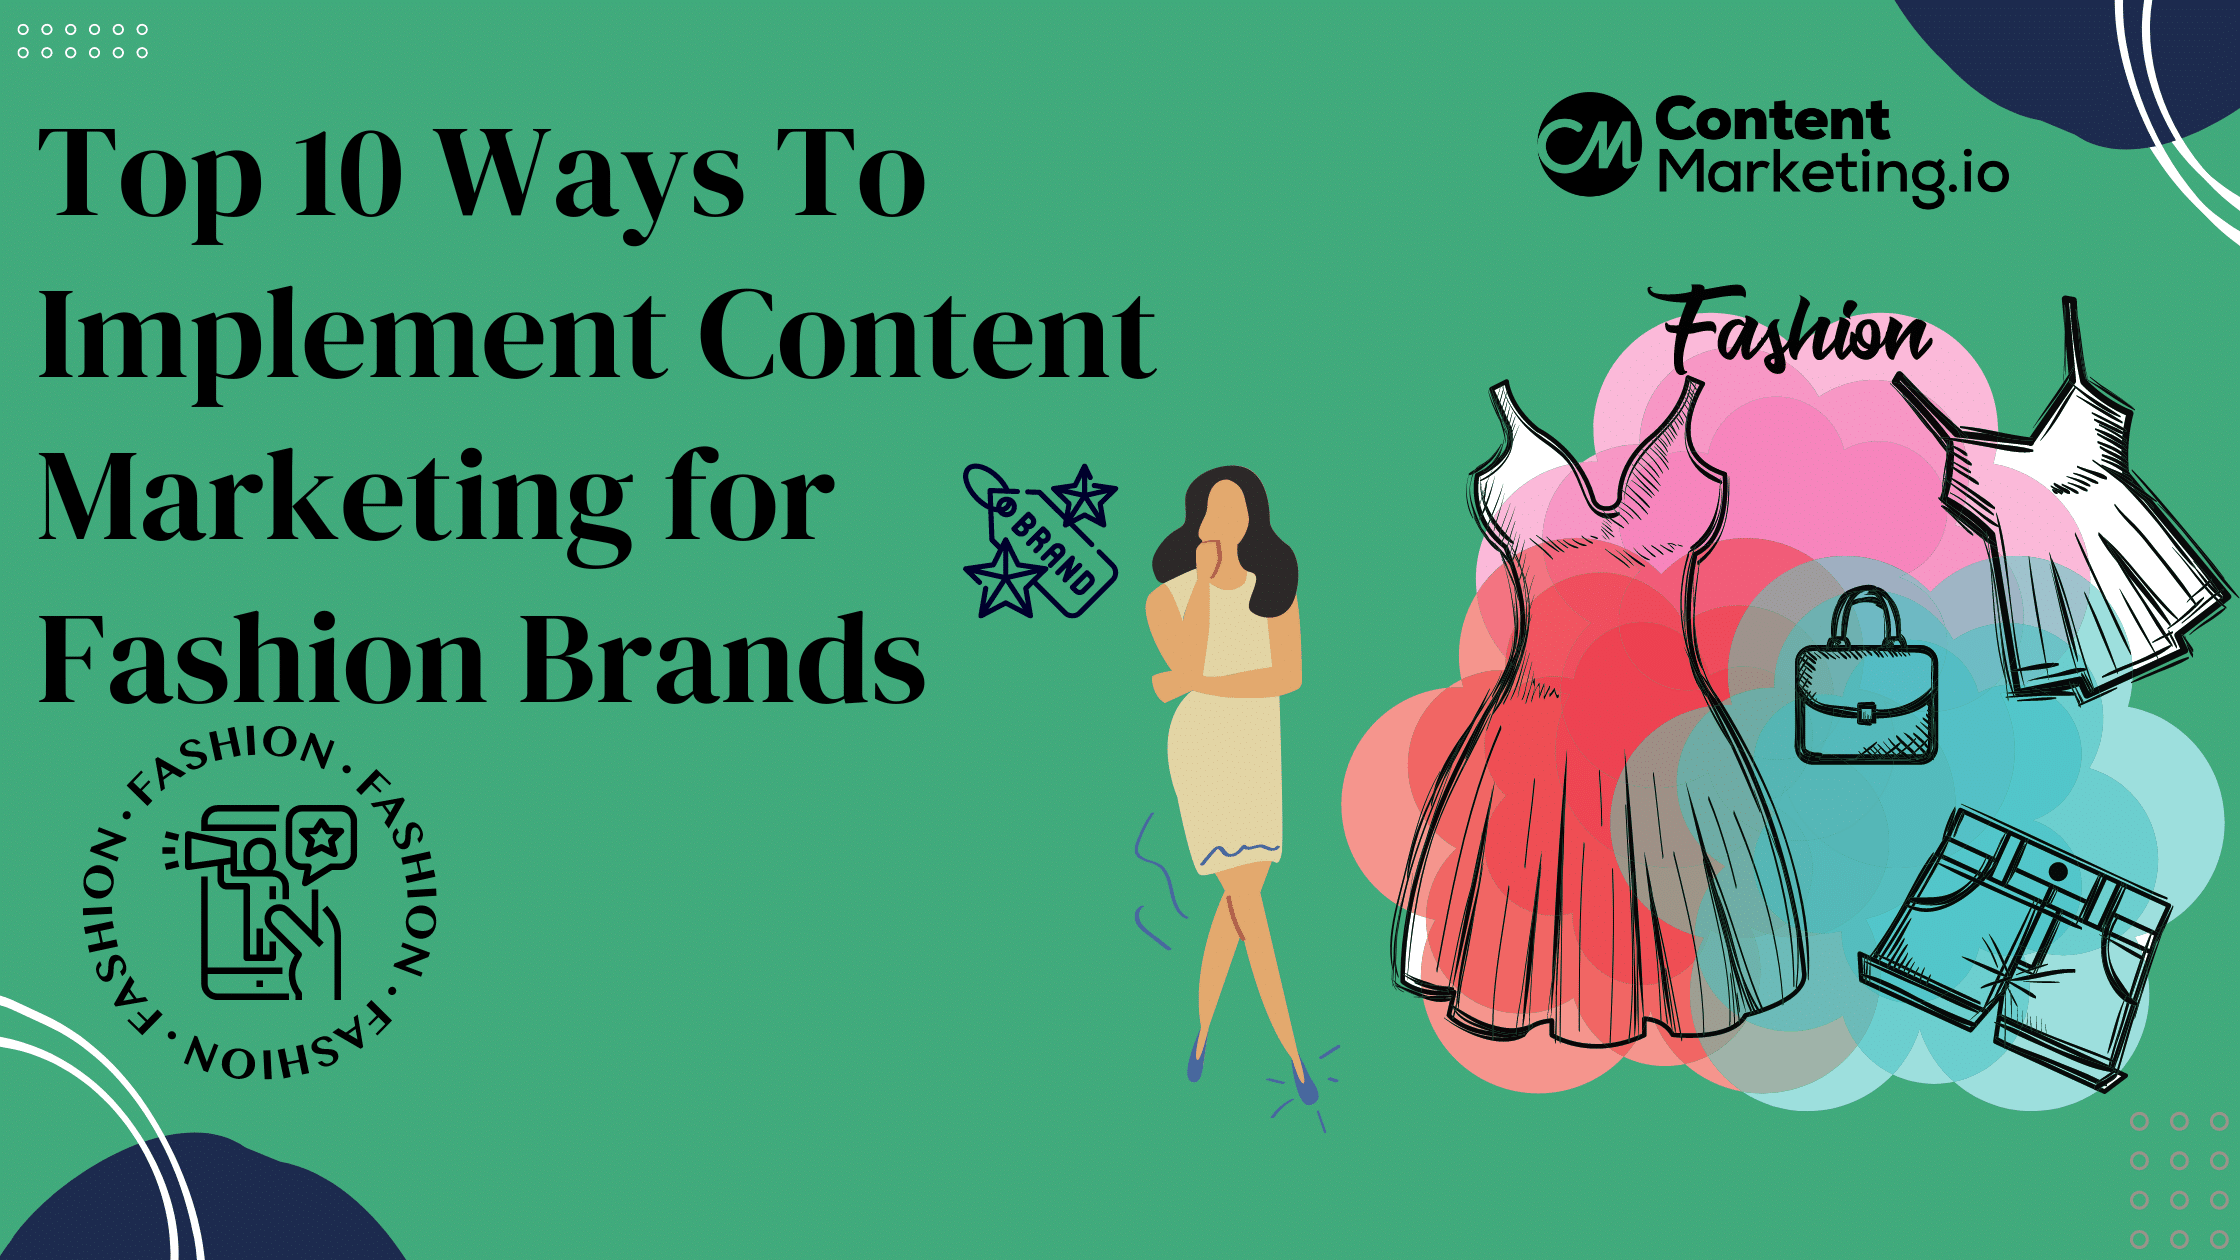 Content Marketing for Fashion Brands